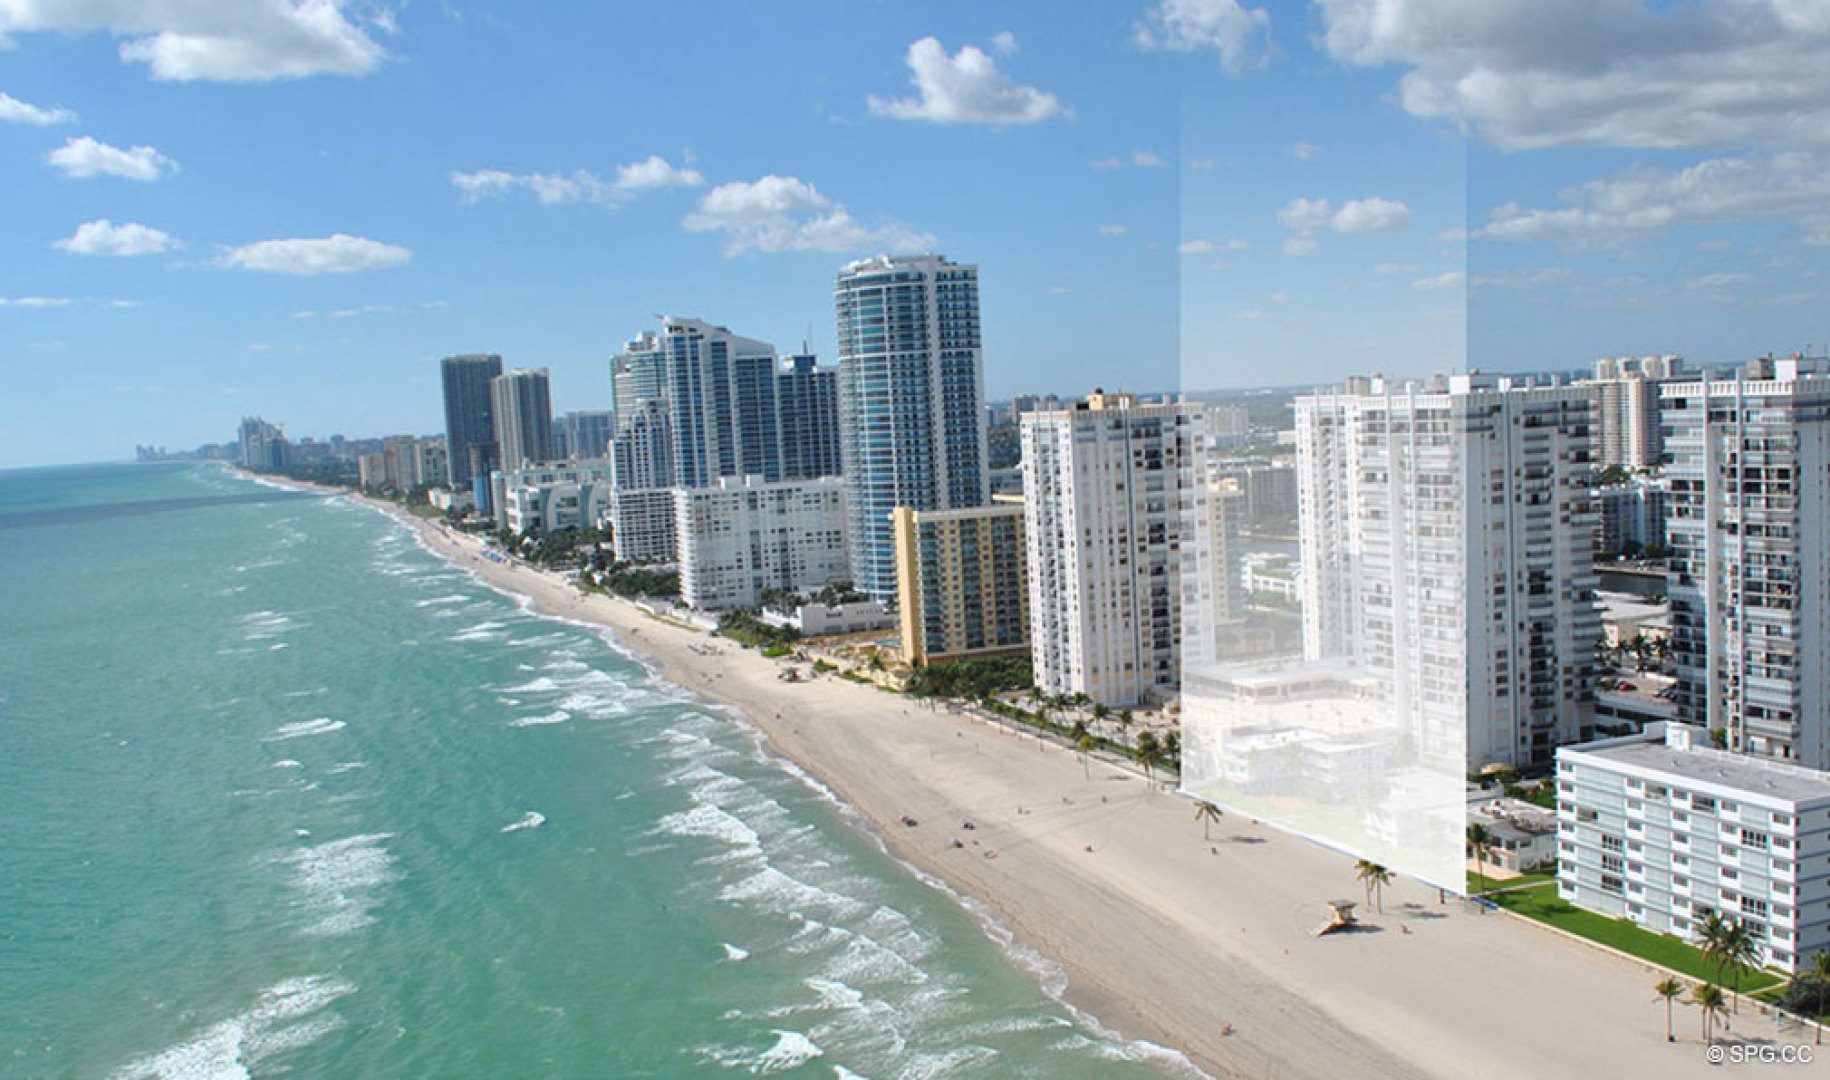 Location Looking South of Sage Beach, Luxury Oceanfront Condos in Hollywood Beach Florida 33019